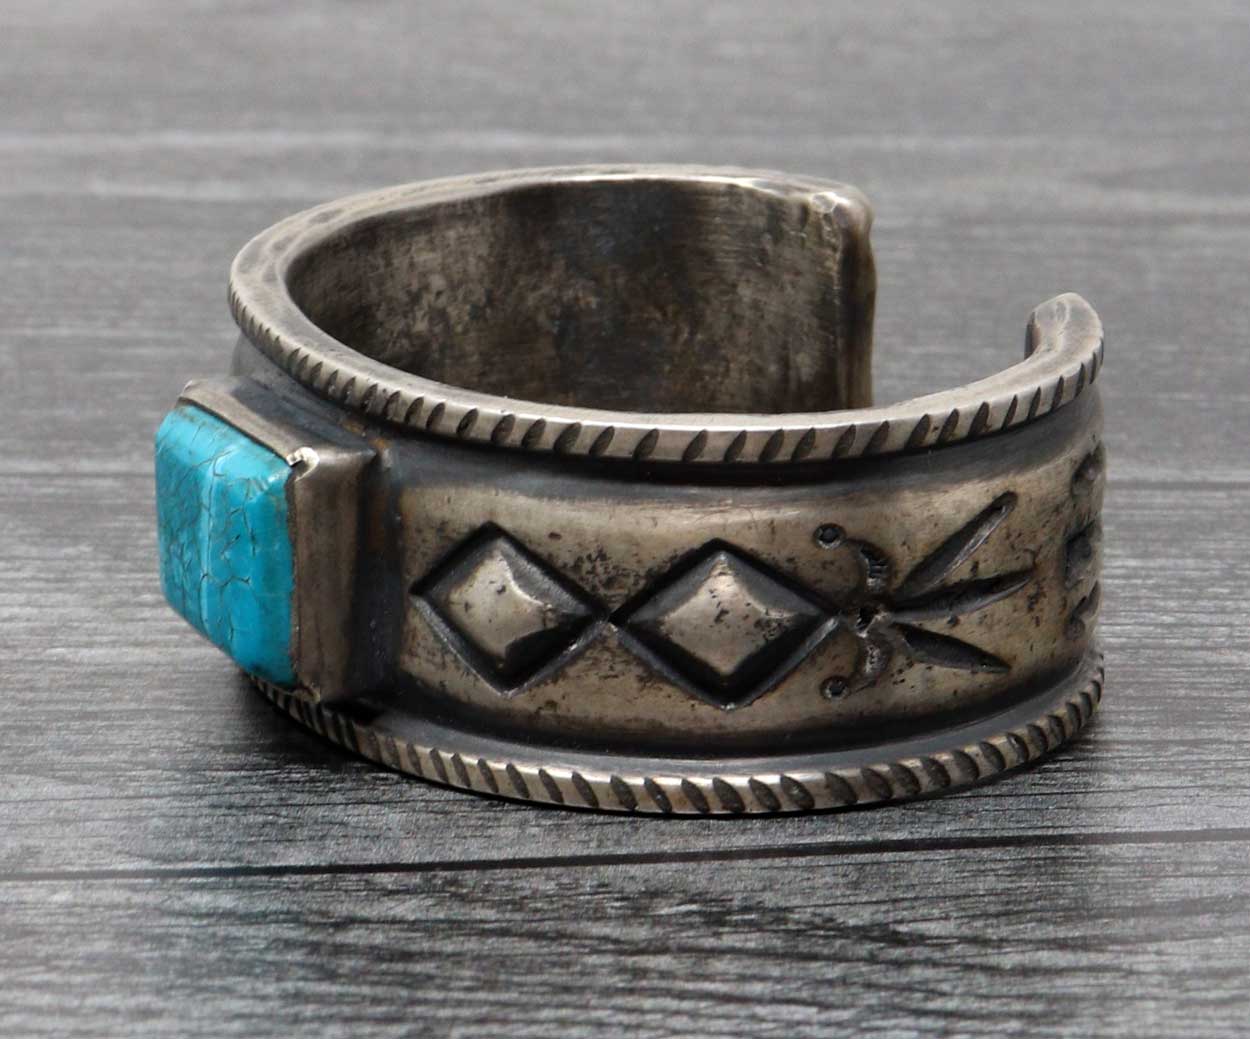 Ingot Bracelet Featuring Kingman Turquoise by Mike French